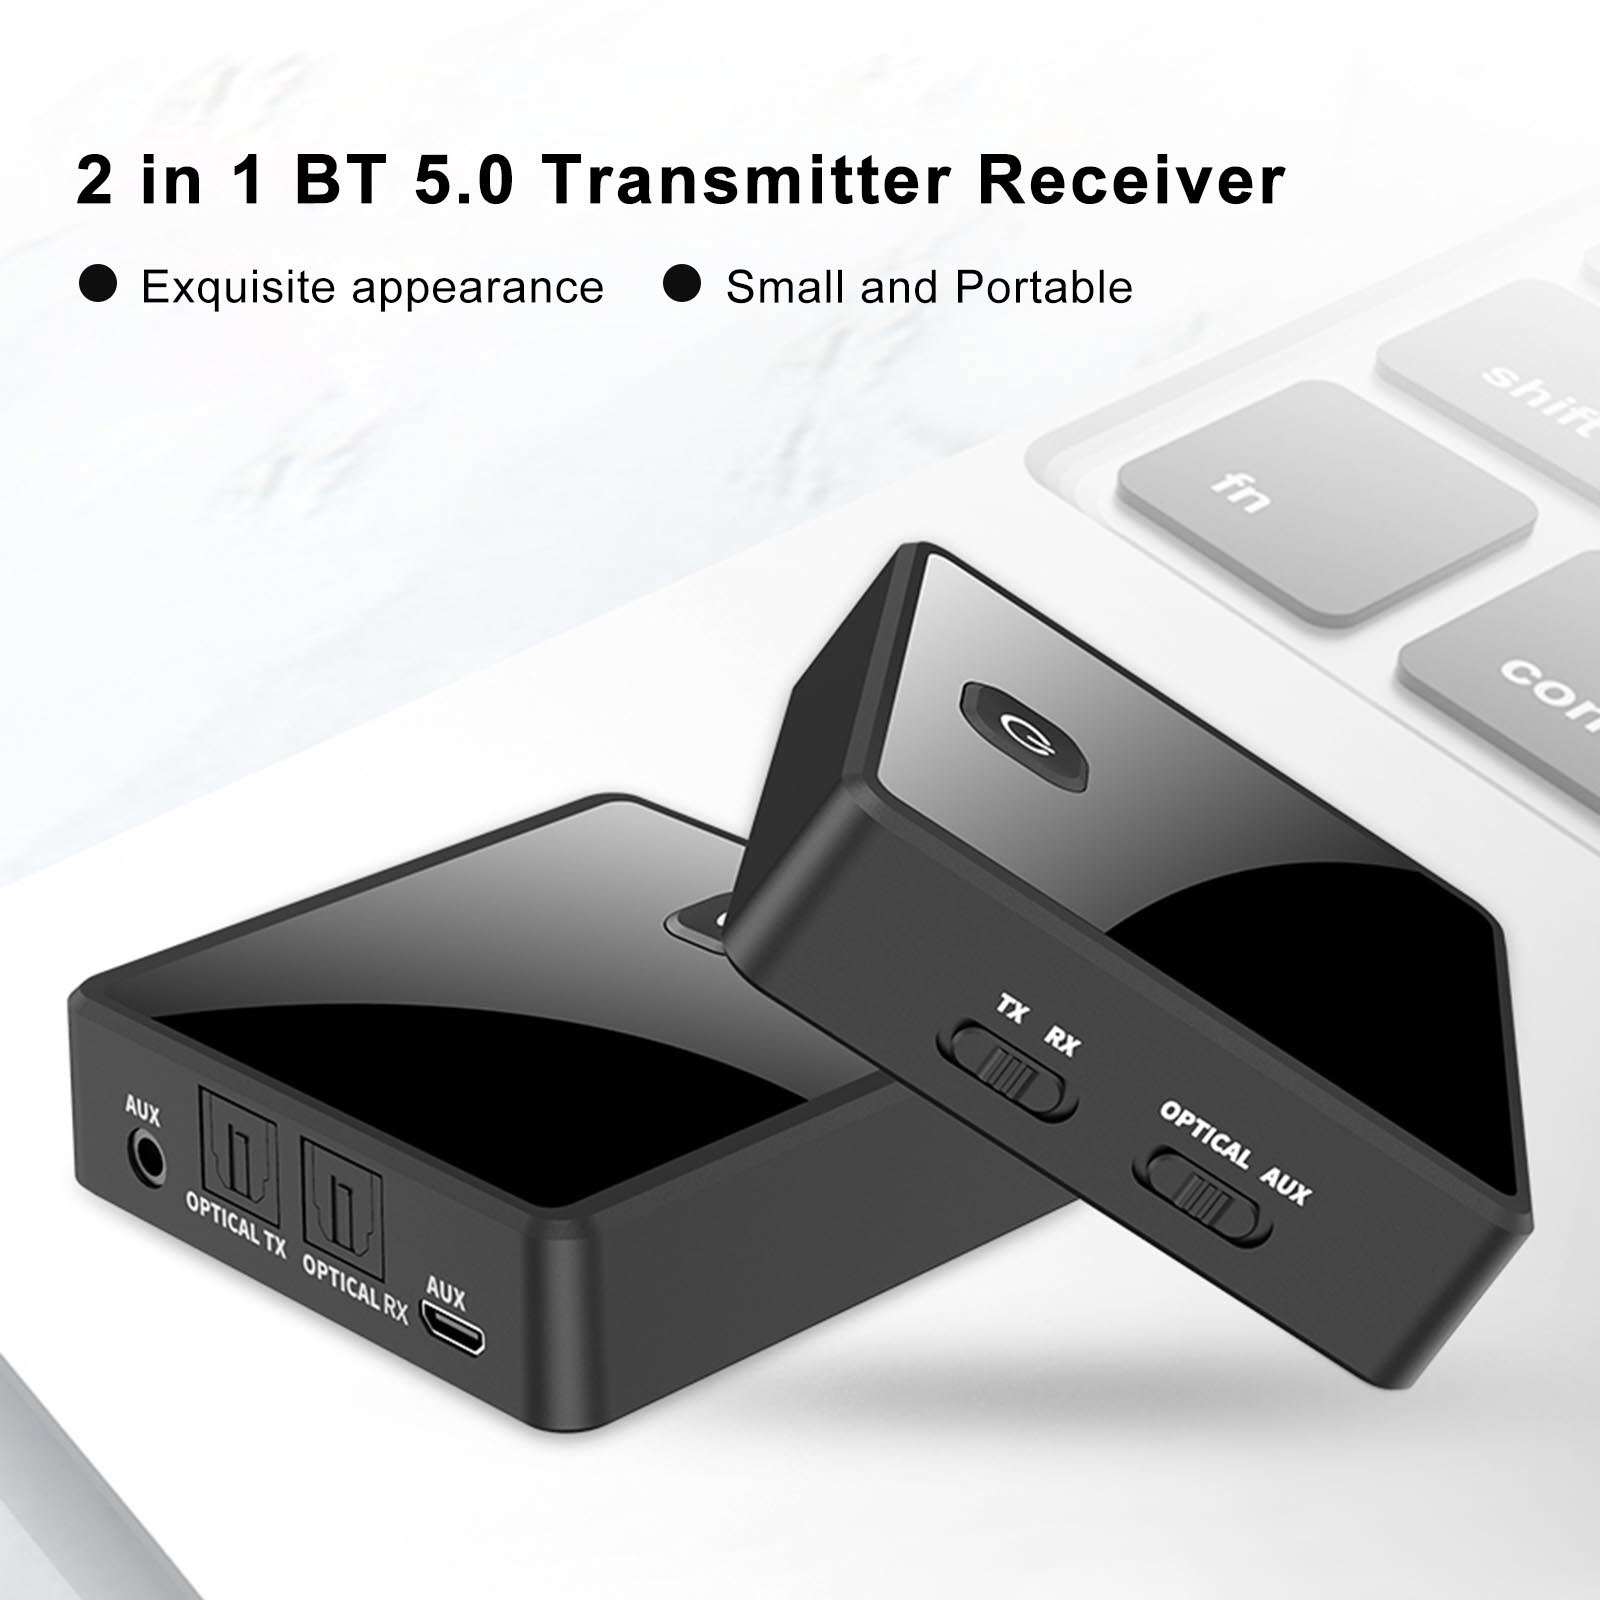 Bộ Thu Phát Âm Thanh FZ-380 Bluetooth 5.0 Transmitter Receiver Low Latency 3.5mm AUX Jack Optical Stereo Music Pin 300mA.  Bluetooth 5.0 Transmitter Receiver Low Latency 3.5mm AUX Jack Optical Stereo Music Wireless Audio Adapter For PC TV Car Speaker